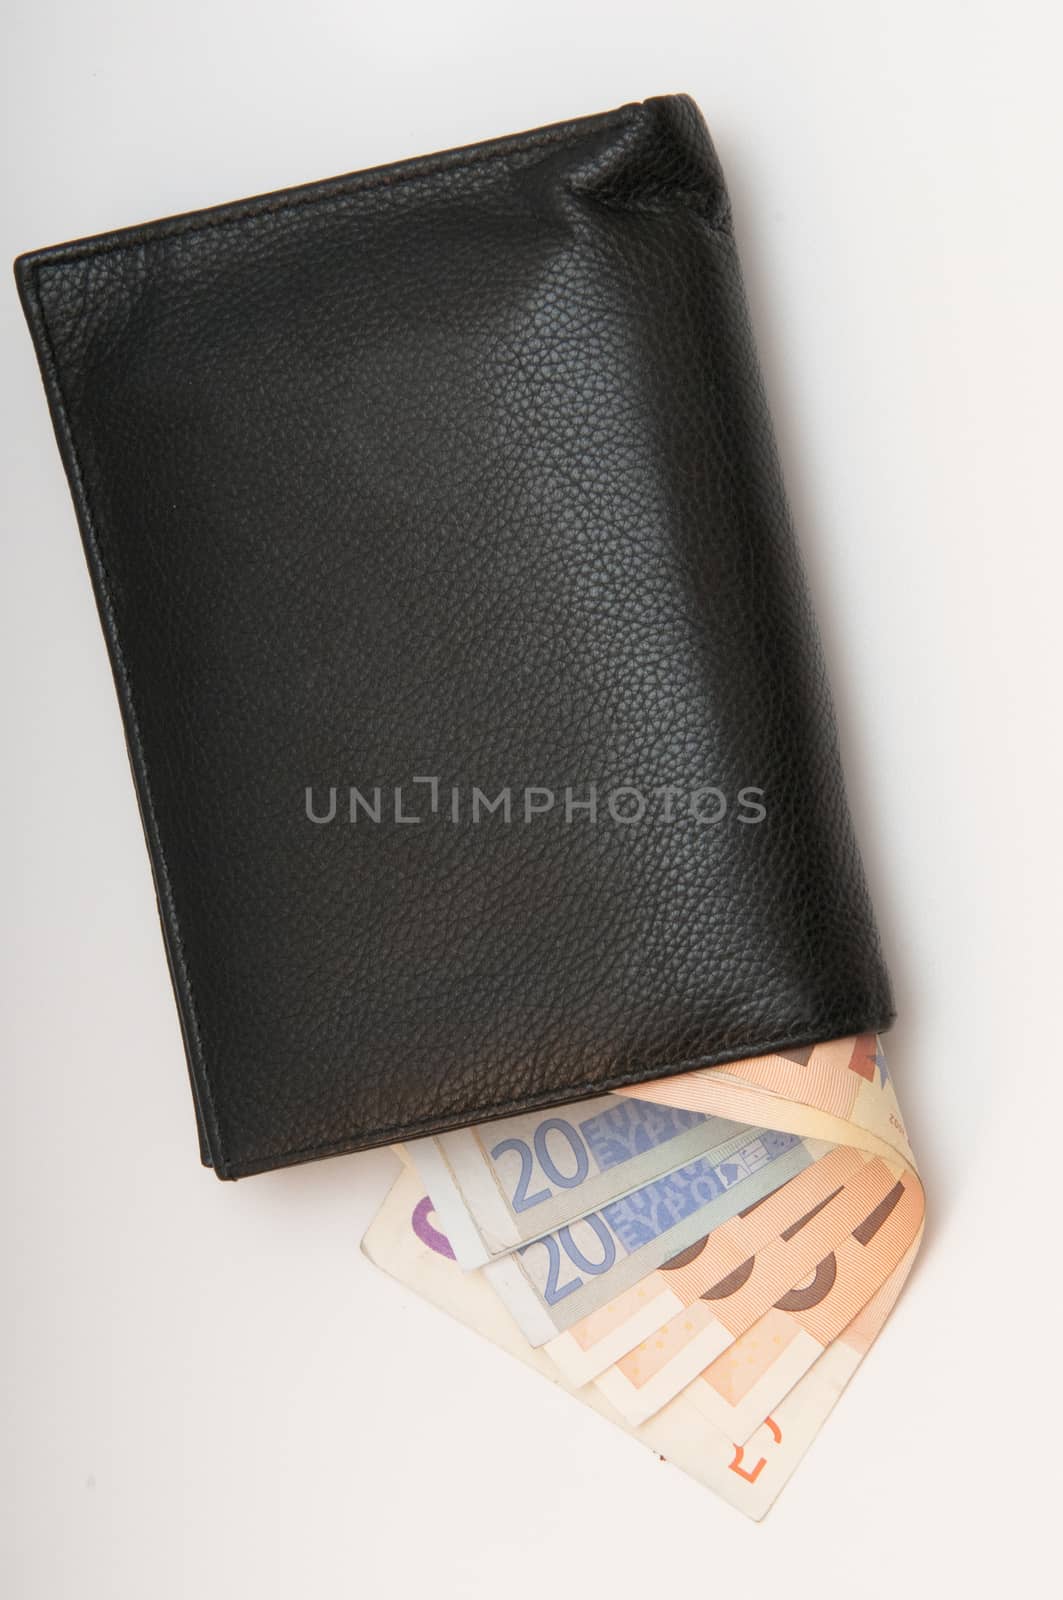 the photo is a wallet with money sticking out, the iimagine may represent an expense, or the value of the euro